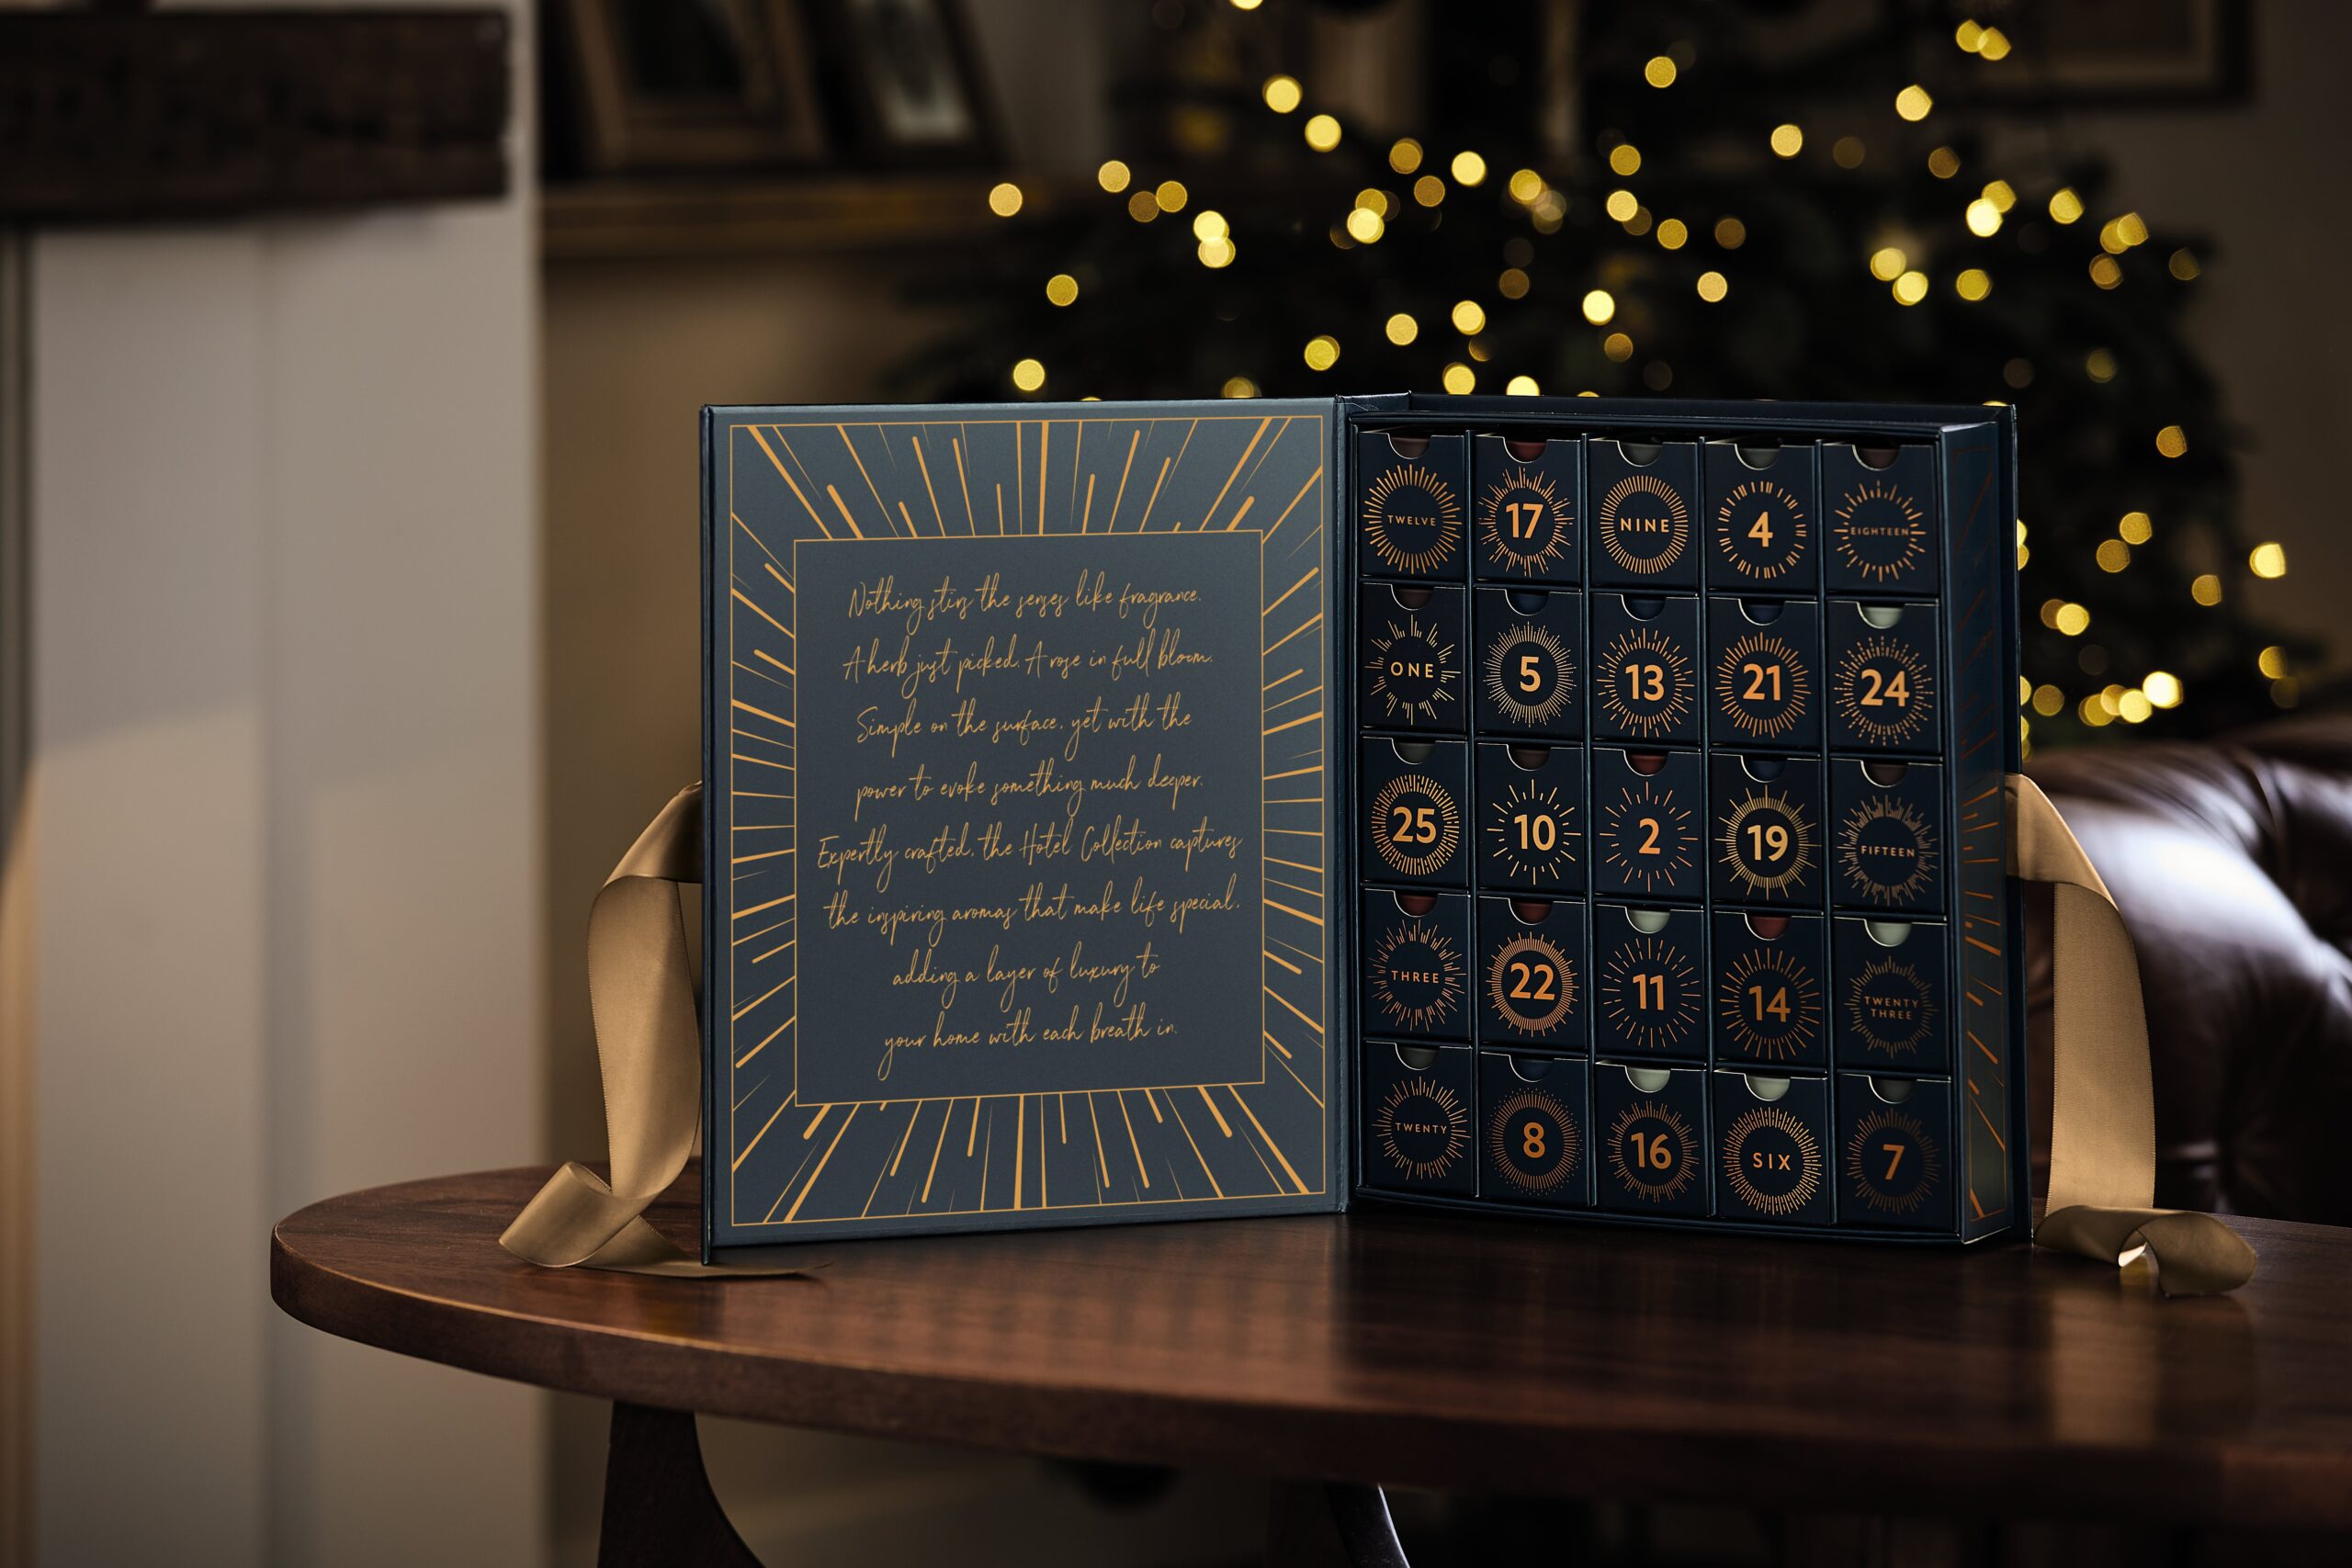 Candle advent calendar open to show the different doors. Dark blue box with gold writing and accents.